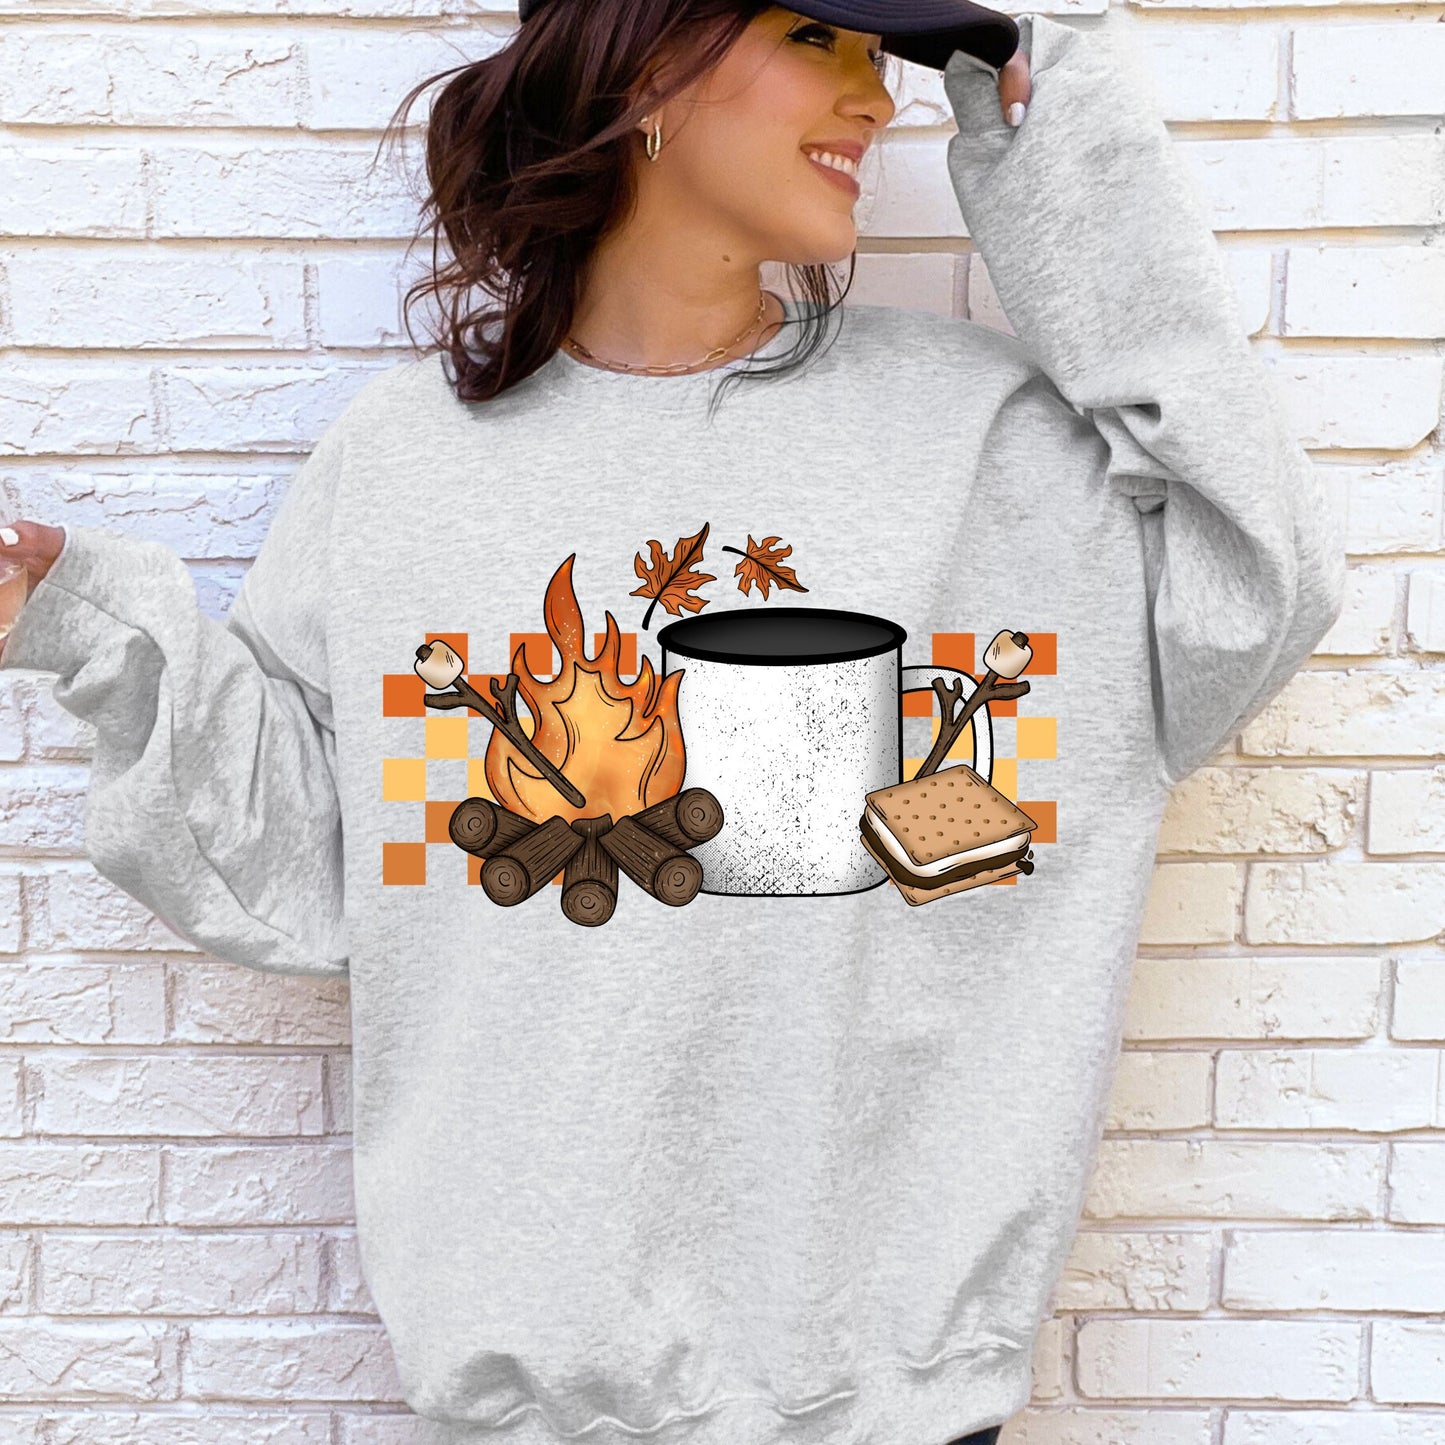 Coffee & Campfires Shirt (W/ or W/out words)